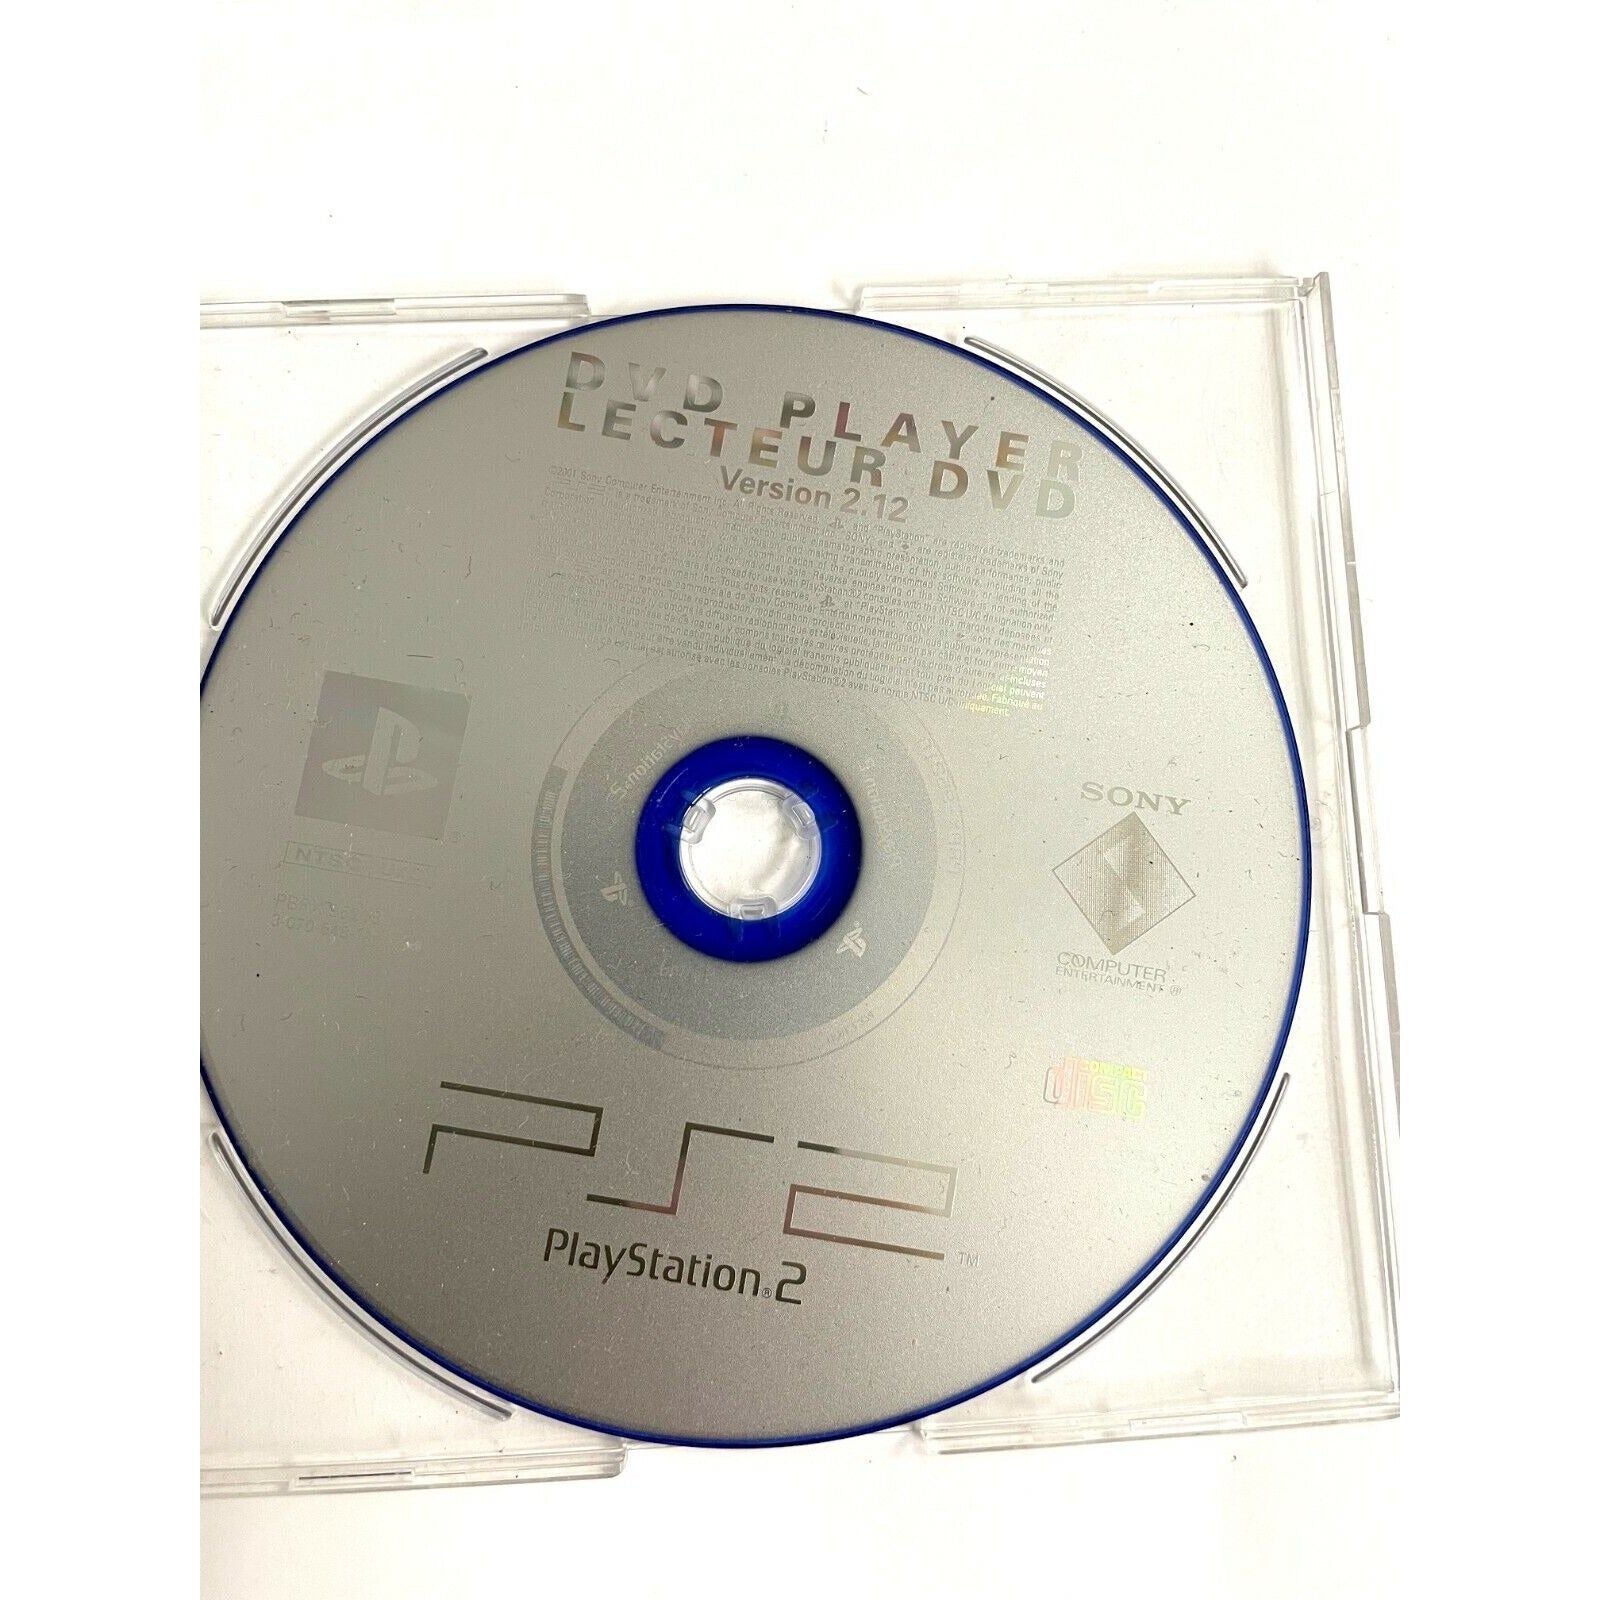 PS2 - PlayStation 2 DVD Player Version 2.12